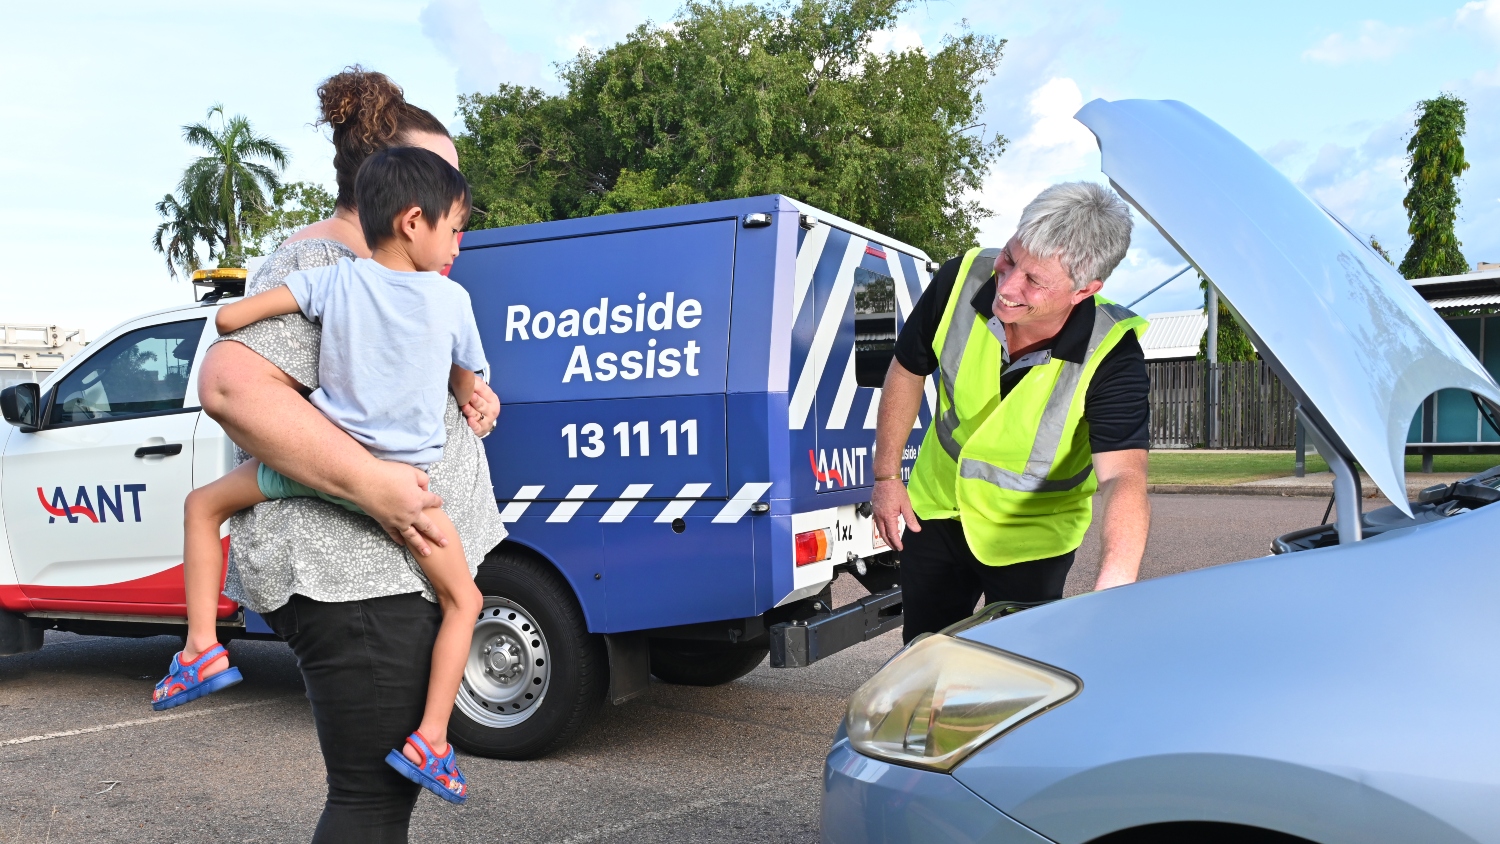  Roadside assistance service person helping a mother and her son.